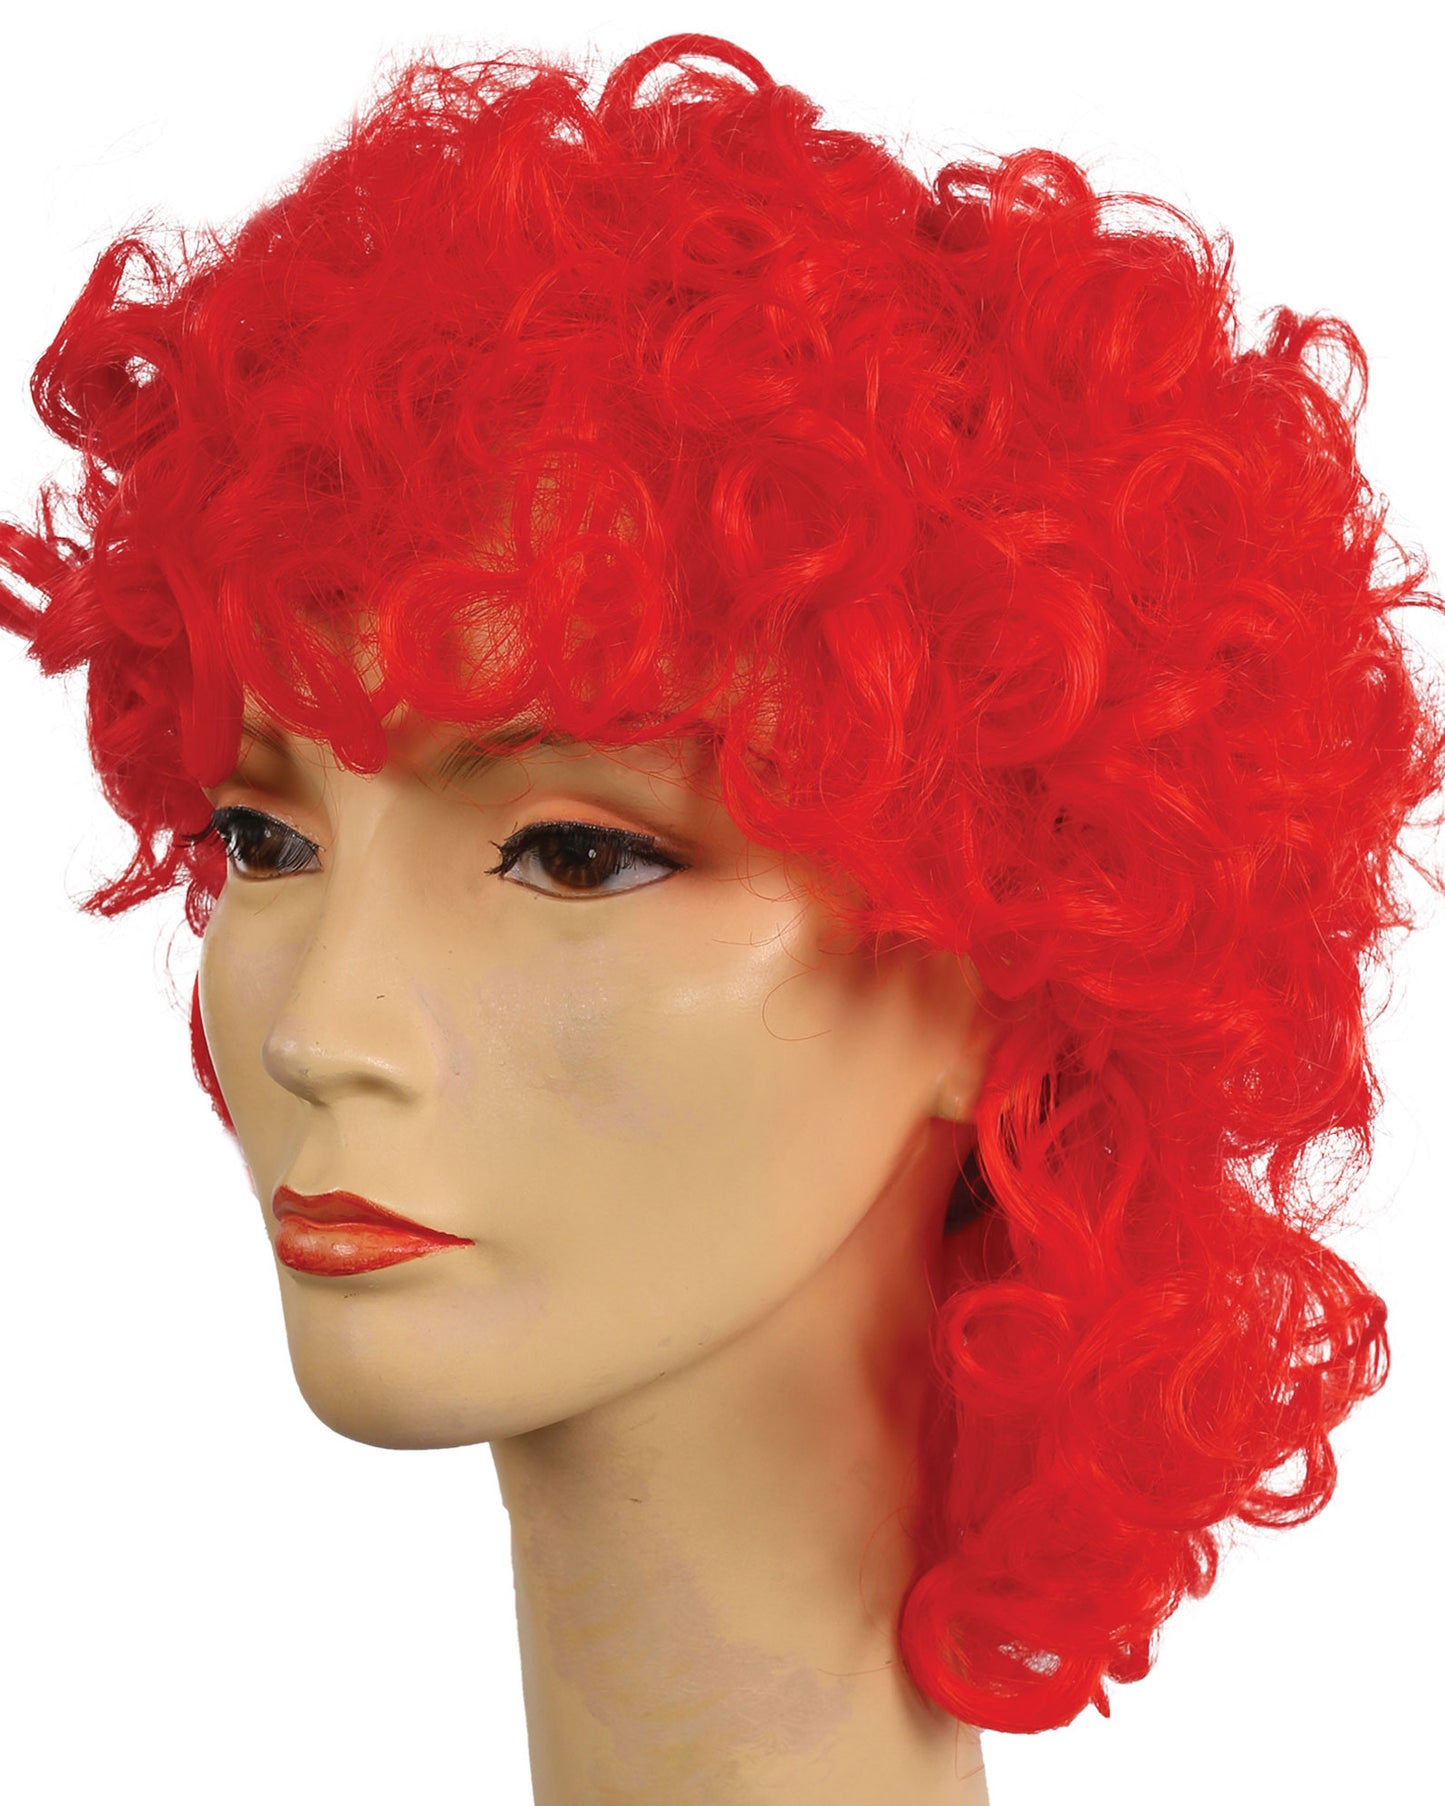 Deluxe Curly Clown Wig